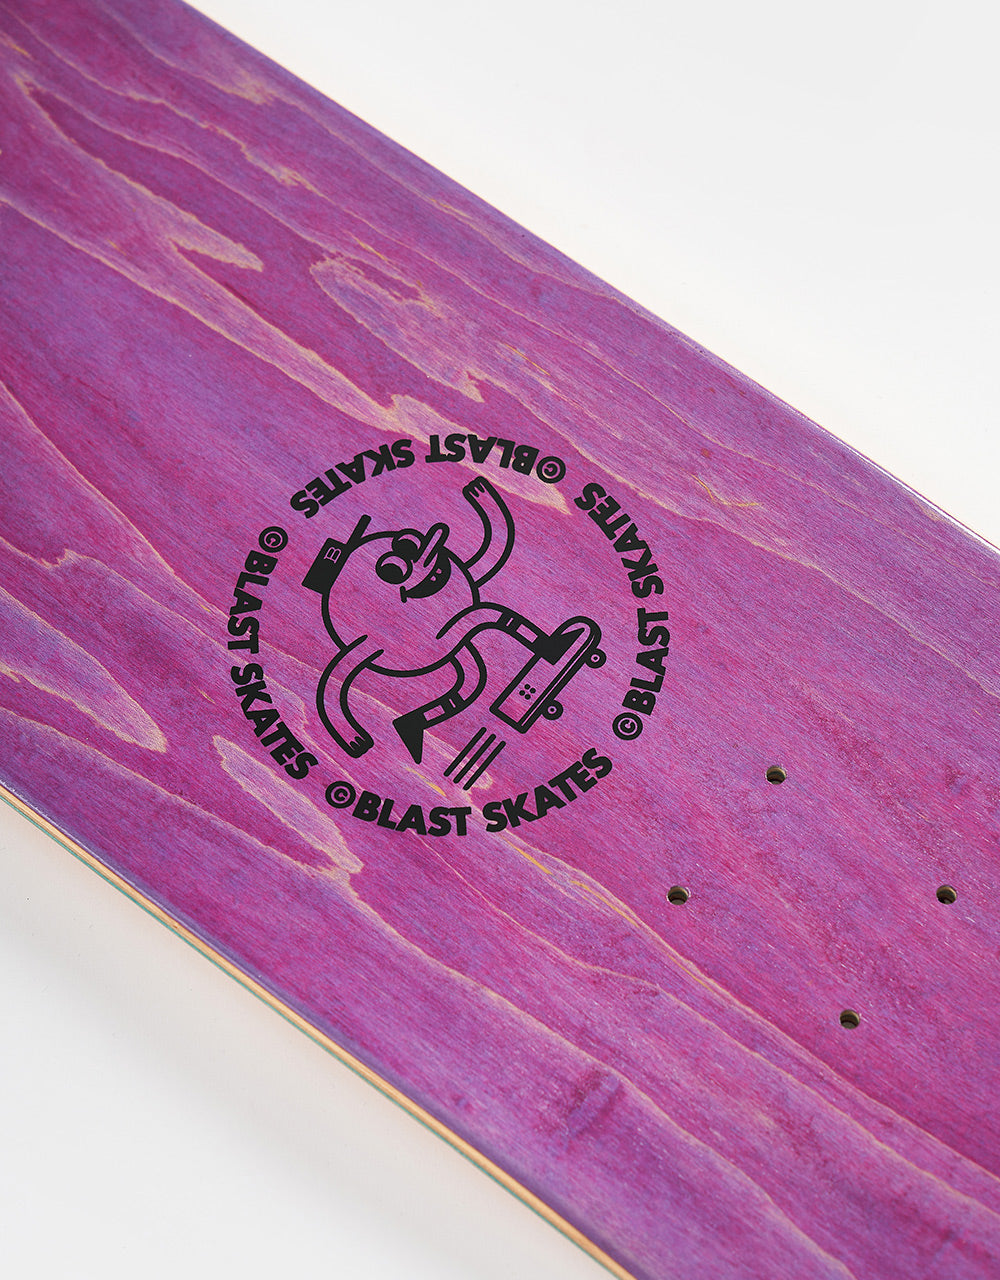 Blast Skates Fruity Bunch Scented 'Square Tail' Skateboard Deck - 8.5"